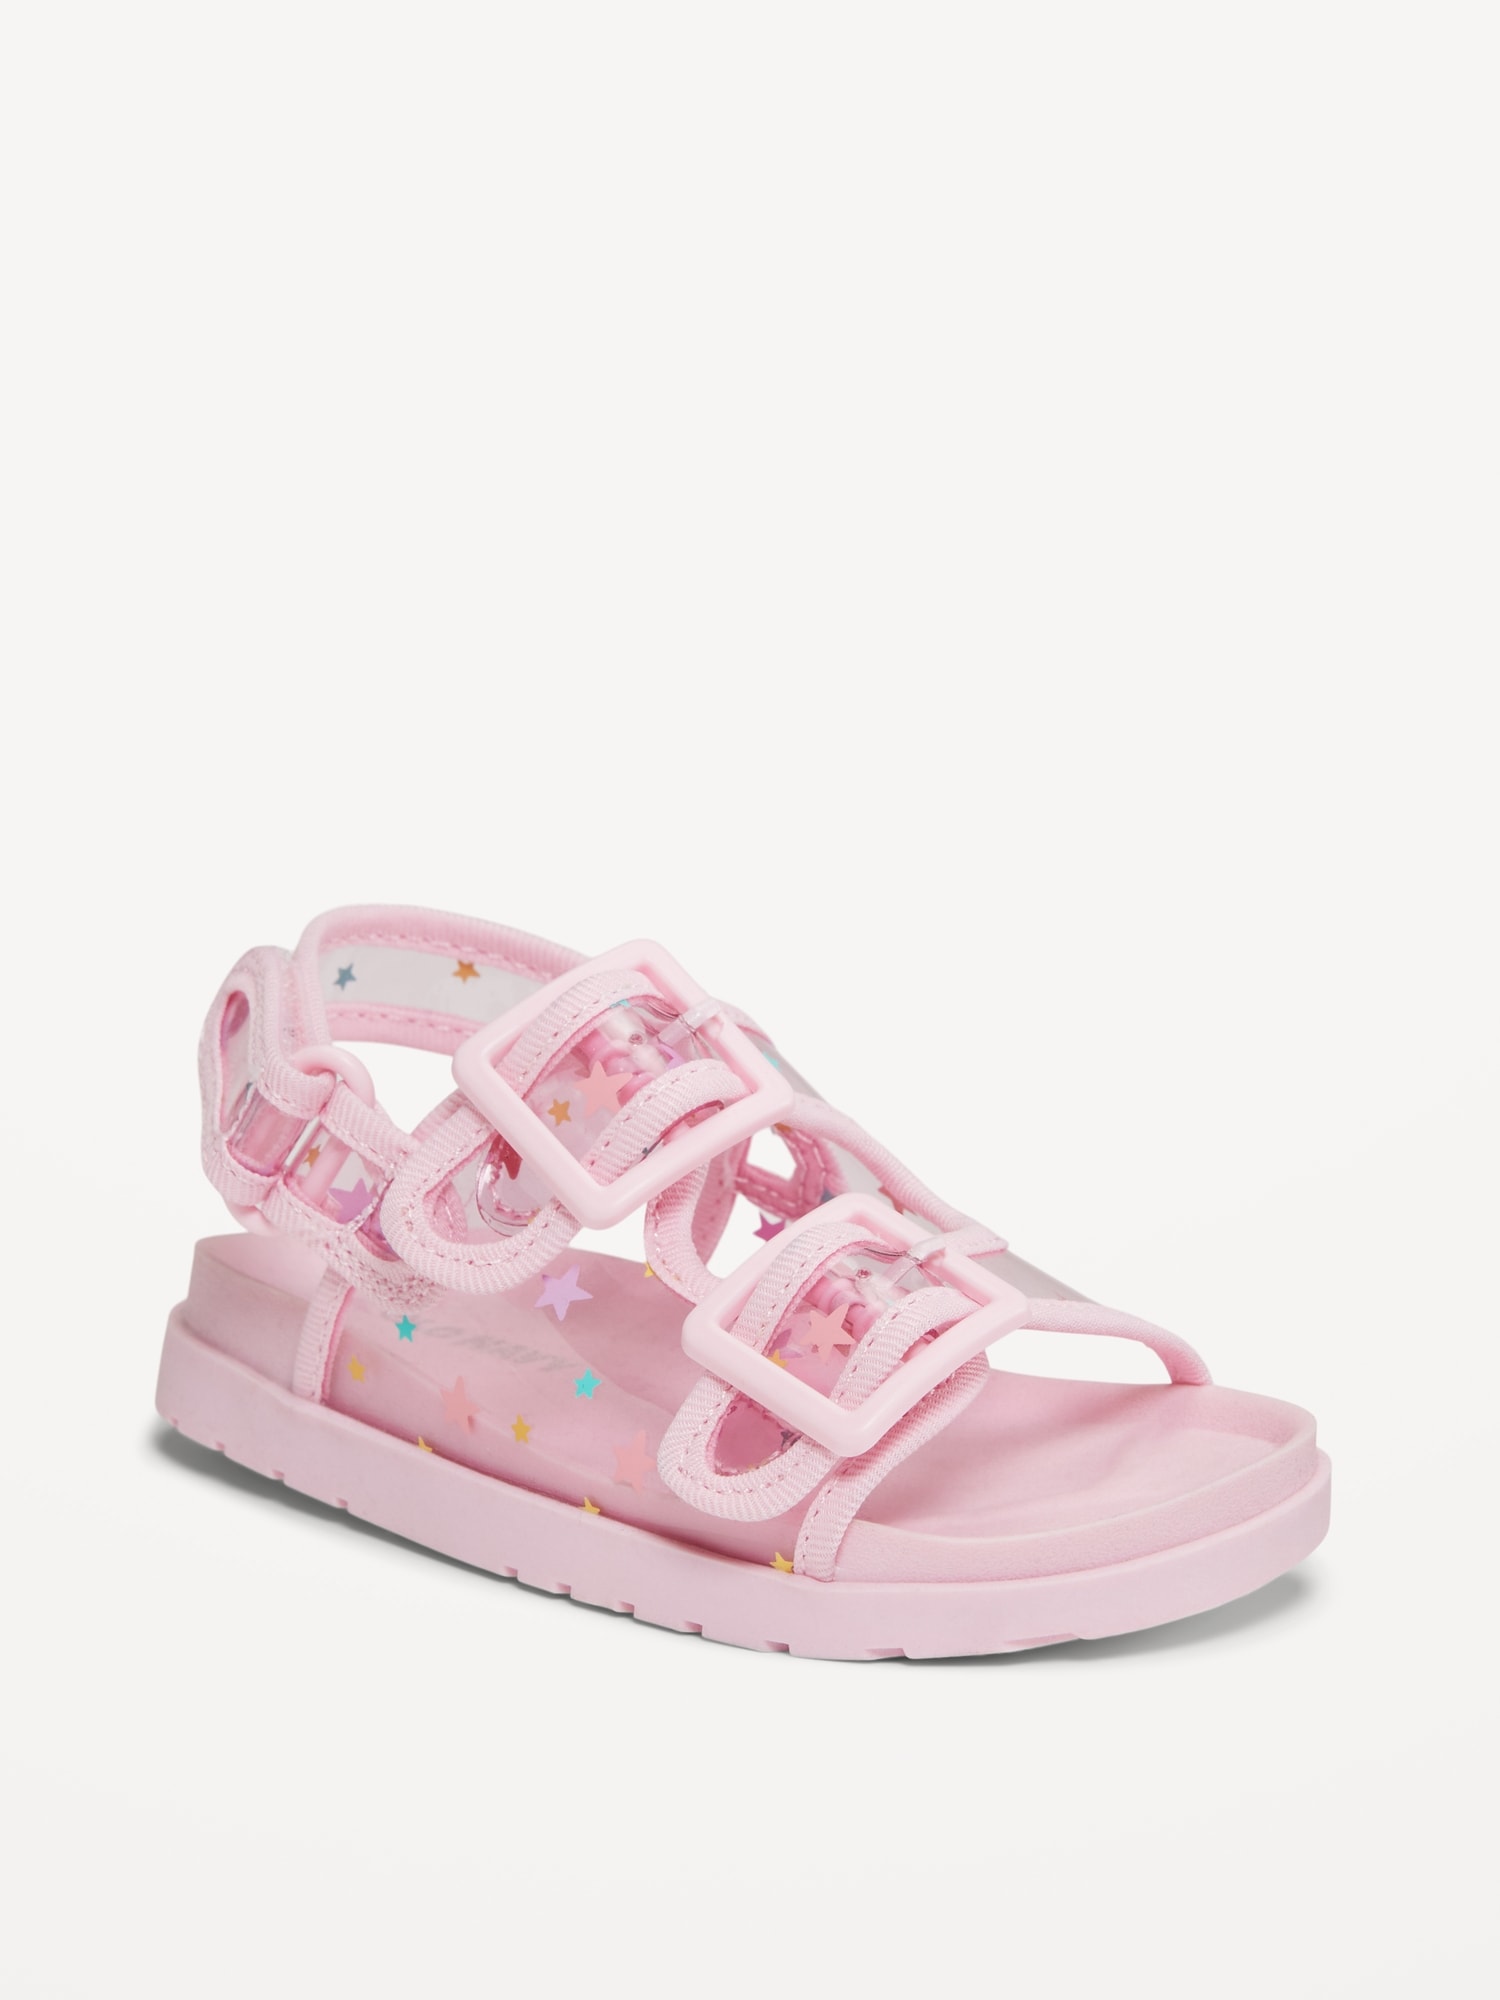 Double-Strap Chunky Sandals for Toddler Girls